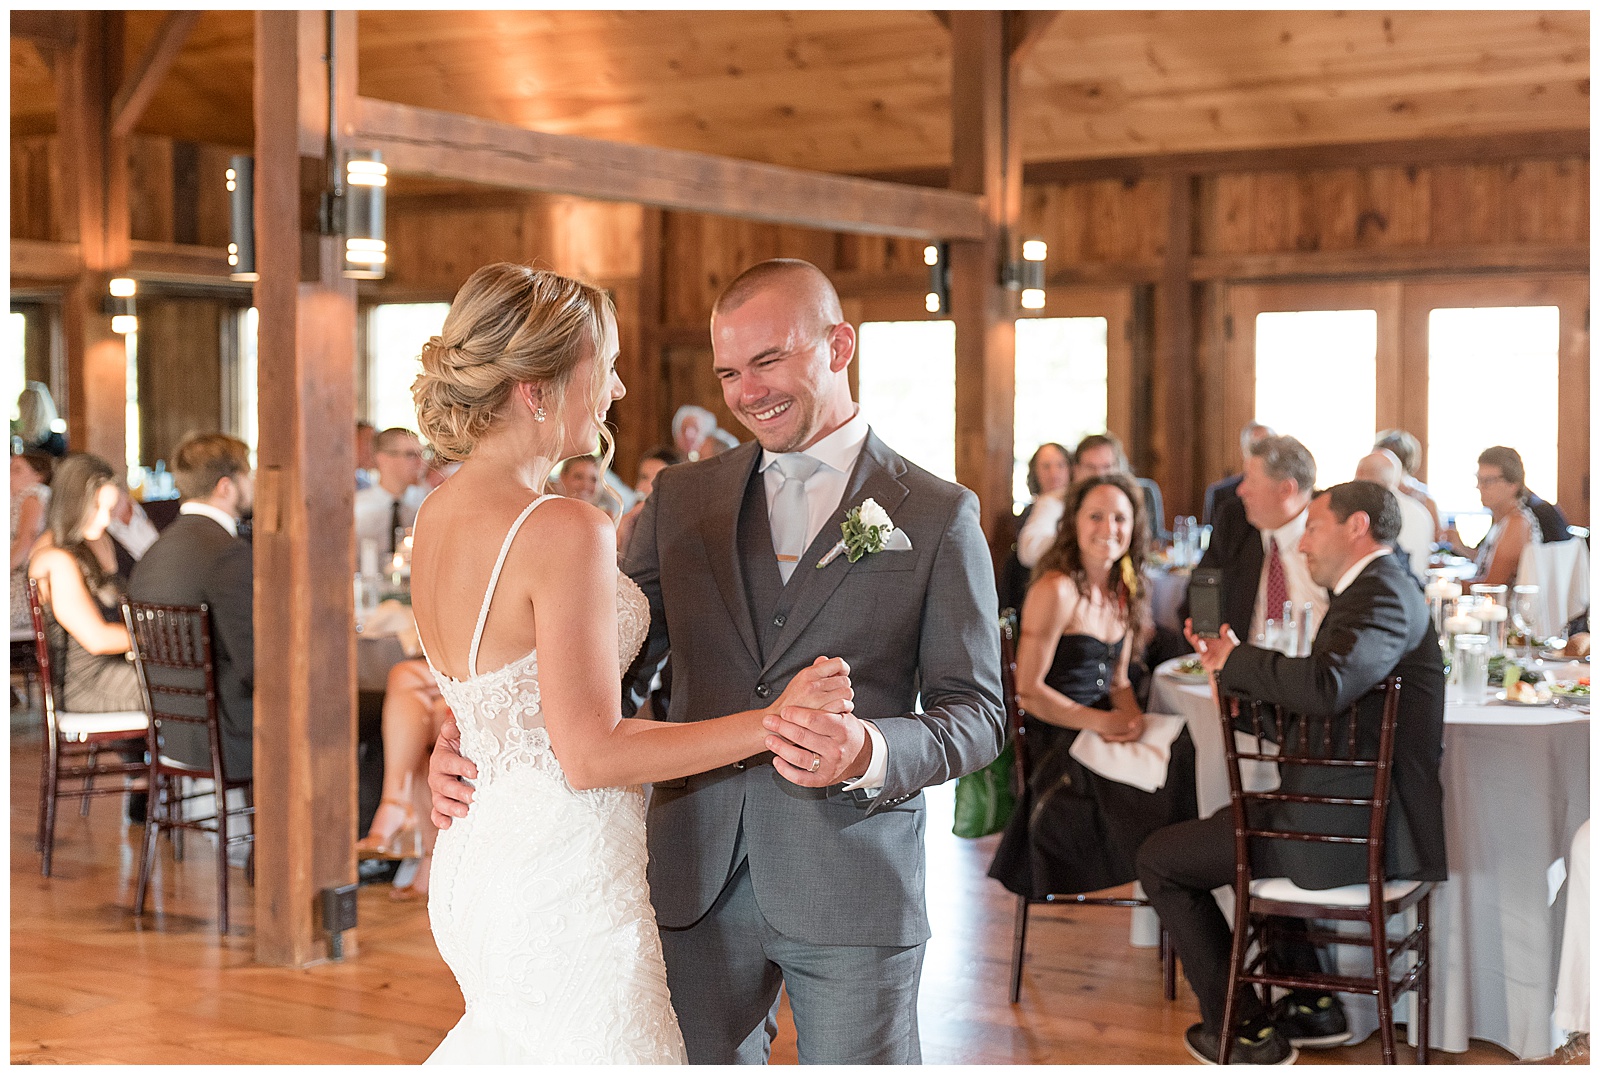 bride and groom dance for the first time as husband and wife inside barn during reception at the barn at silverstone